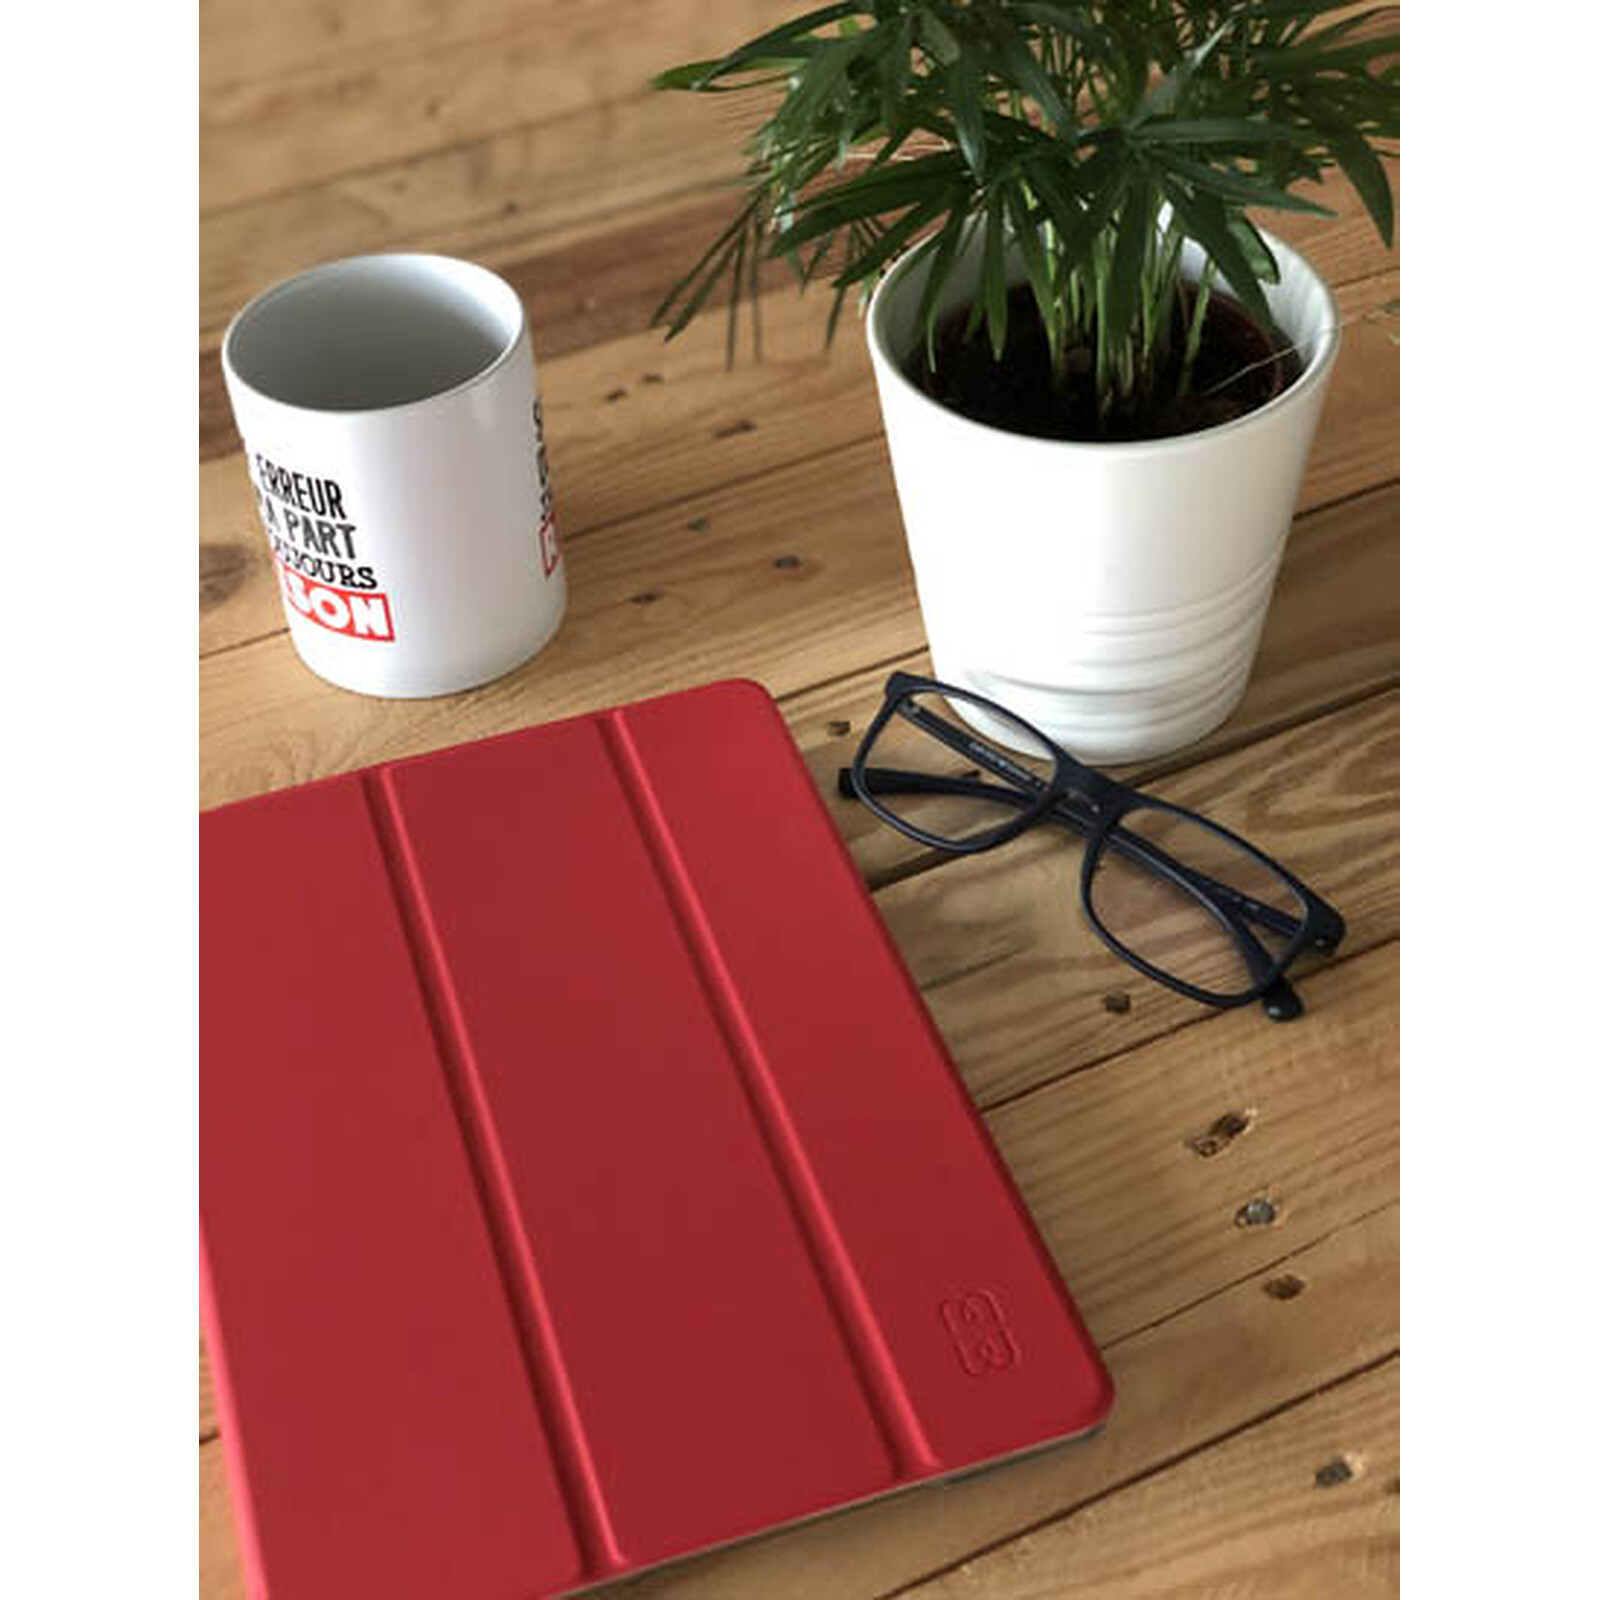 Housse iPad Pro 12.9 Etui Multipositions Rouge - Support orientable 360°